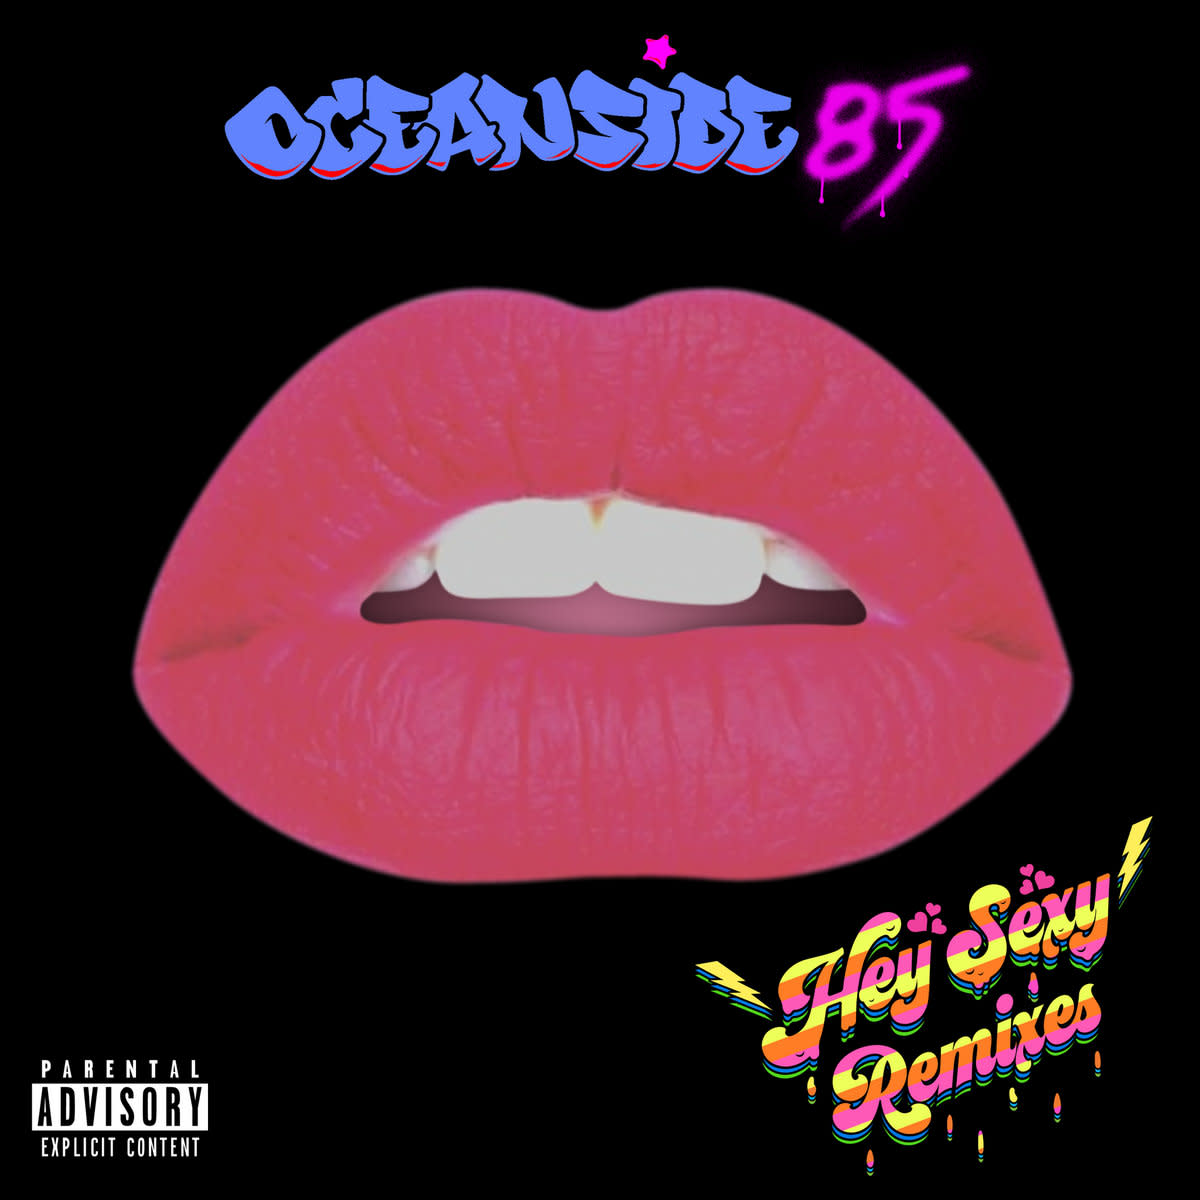 synth-album-review-hey-sexy-remixes-by-oceanside85-guests